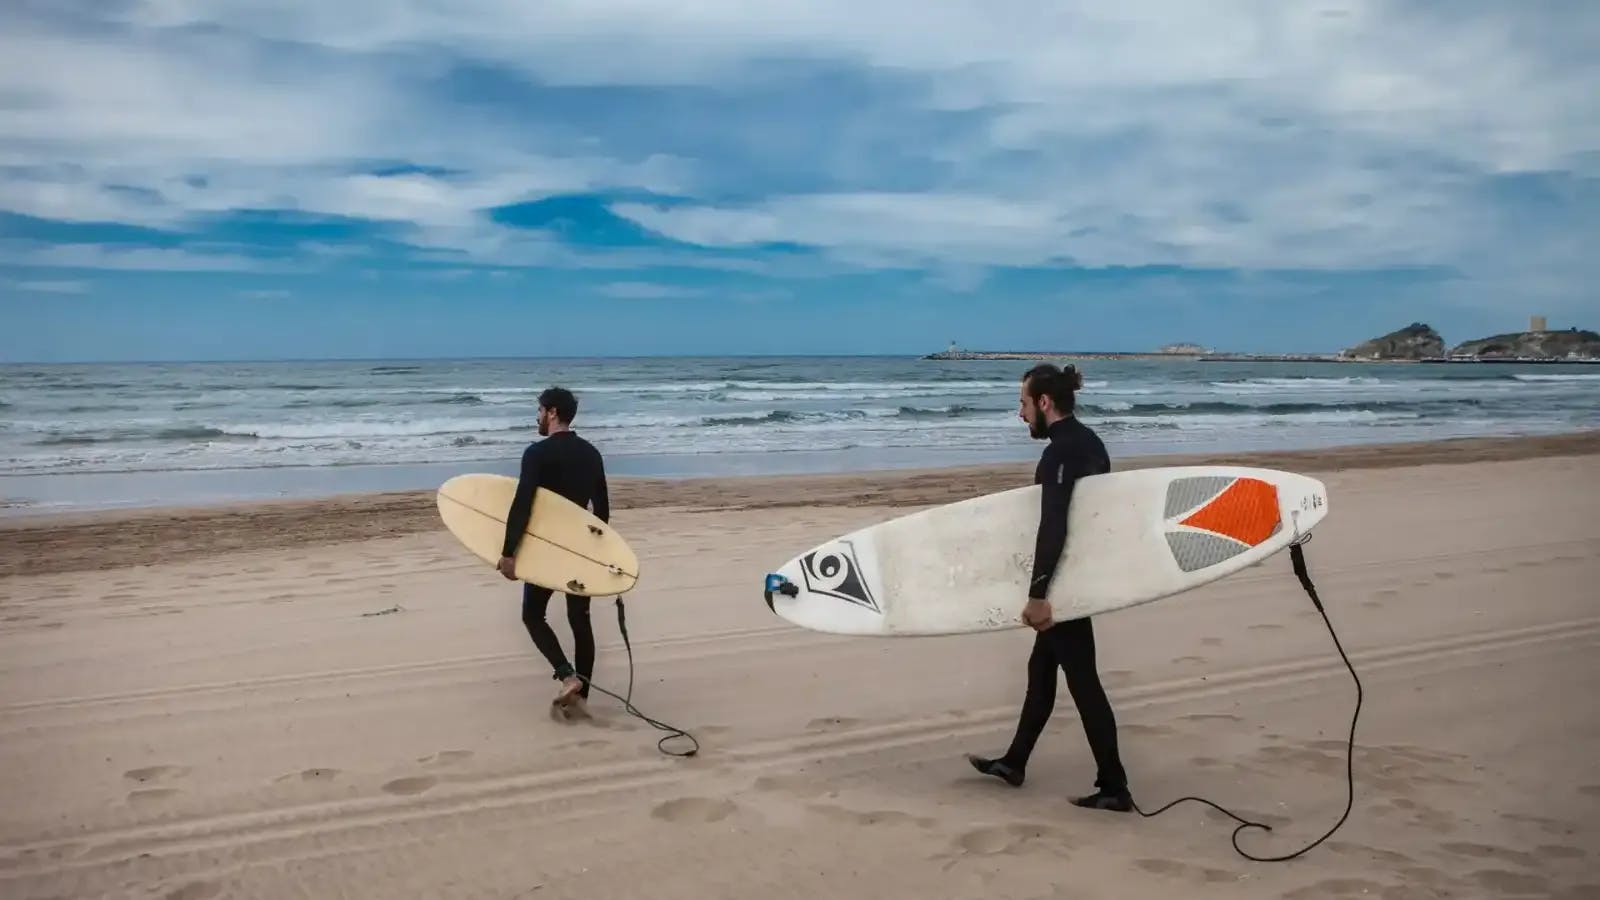 Coworking, Coliving and Surfing in Turkey